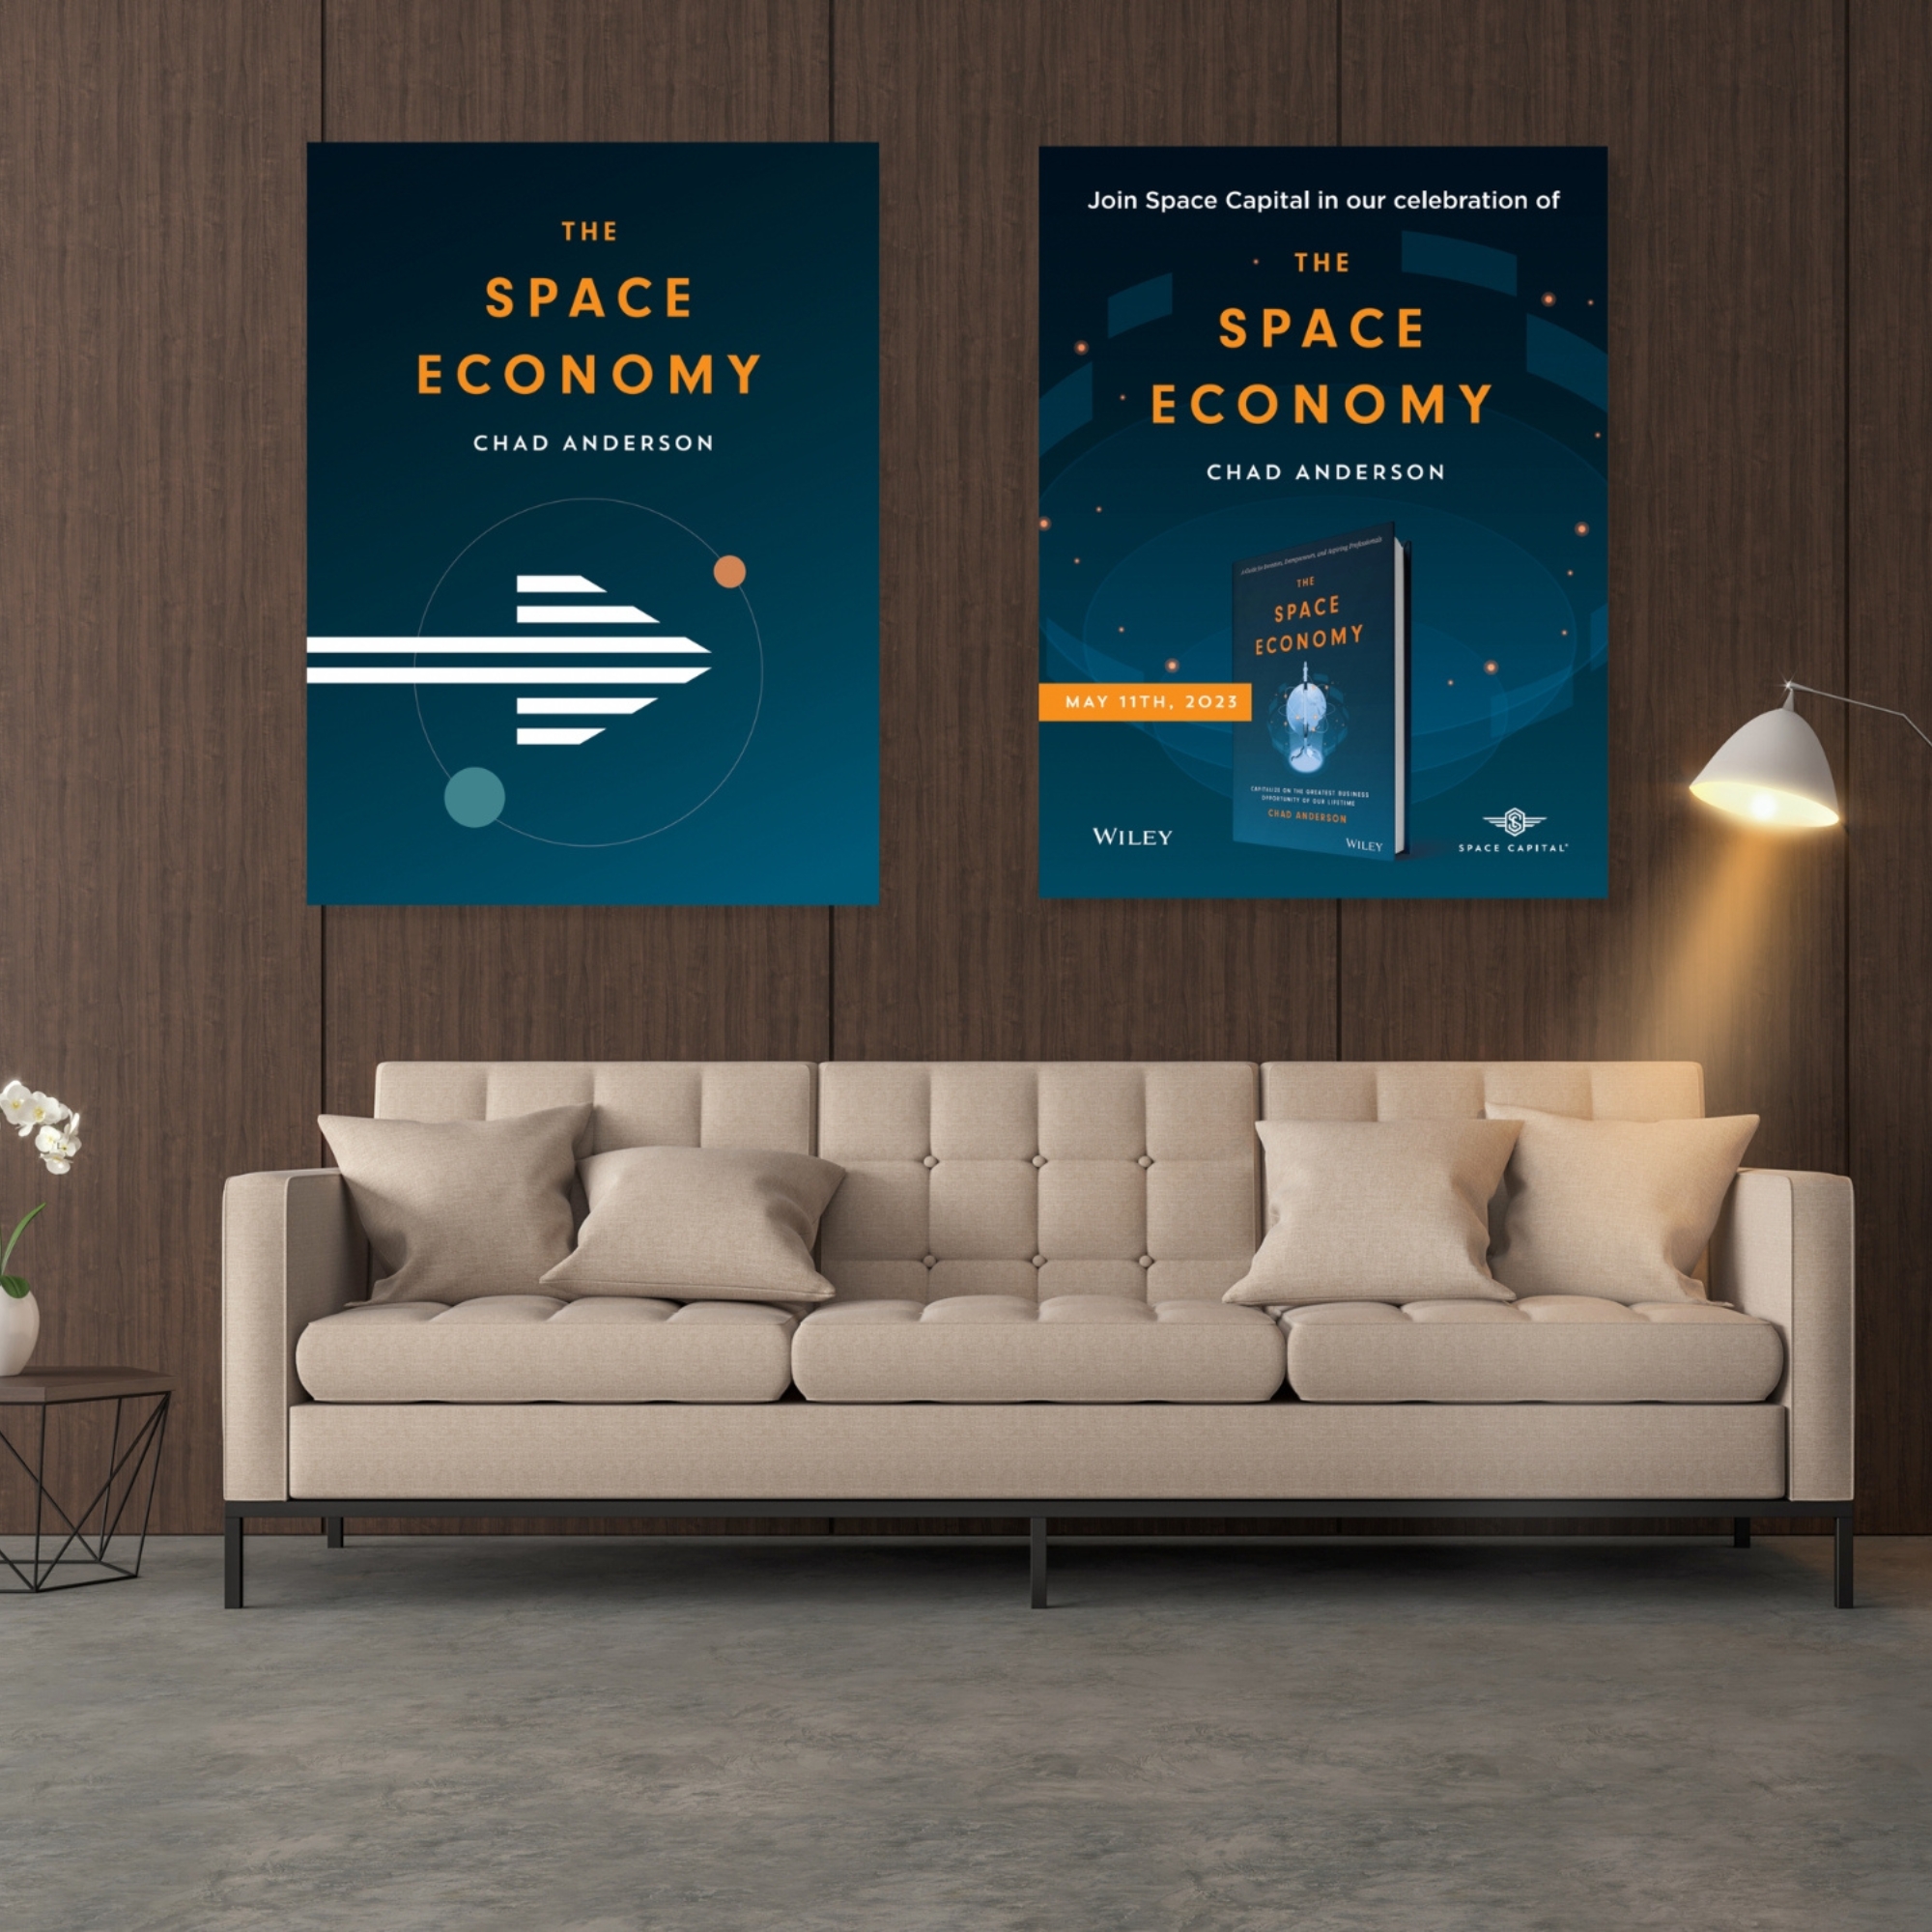 Mockup of two event posters for The Space Economy book launch